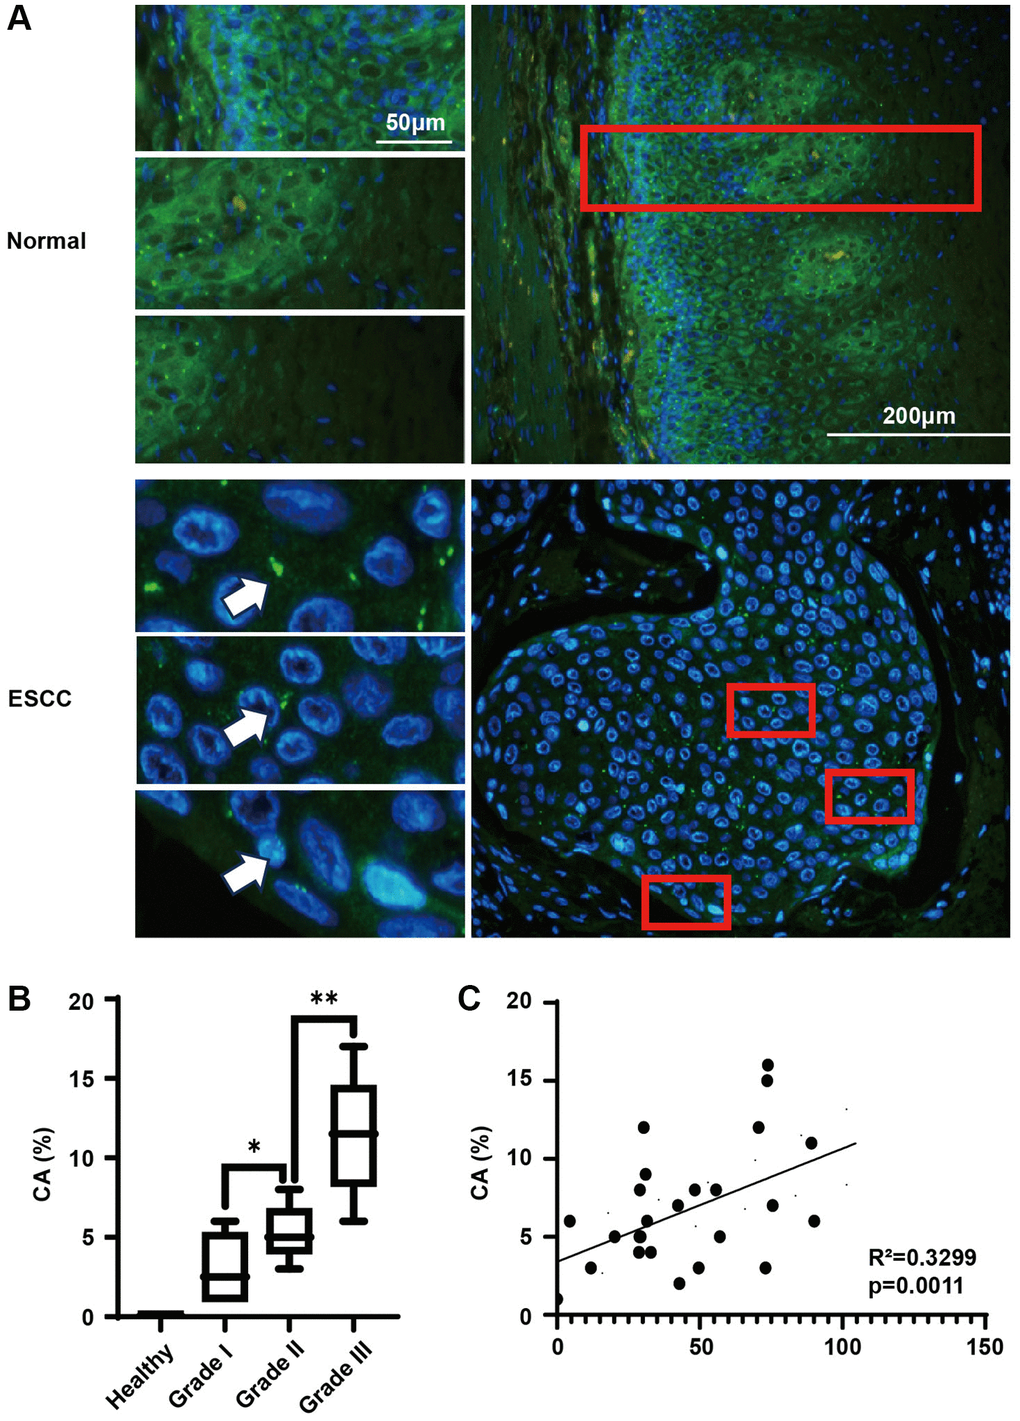 Centrosome amplification in ESCC tissues and paired analysis with KIFC1 expression levels. (A) Centrosome staining in ESCC tissues and adjacent tissues, centrosomes marked using anti-gamma-tubulin antibodies (green) and DNA stained with DAPI (blue); (B) Analysis of centrosome amplification phenomena in relation to tumor grade; (C) Analysis of the relationship between KIFC1 expression levels and rates of centrosome amplification. n = 30, ***